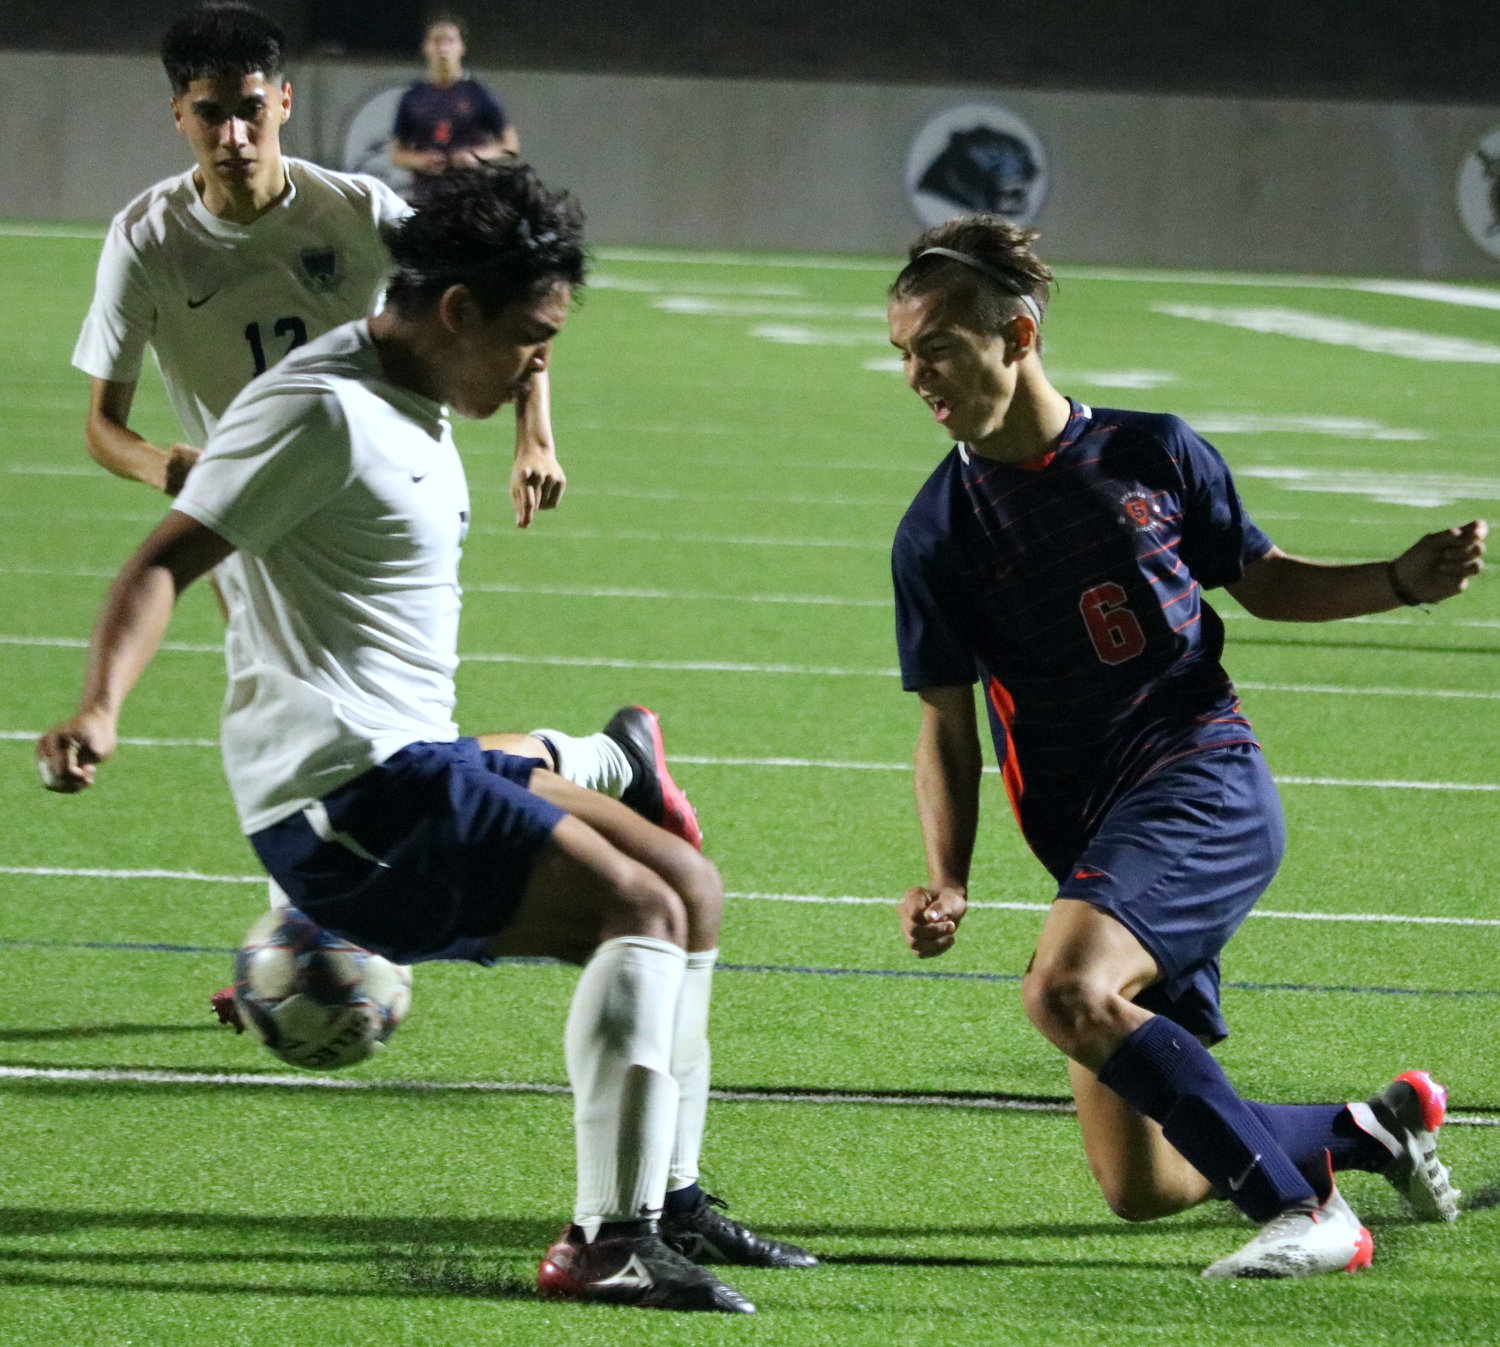 Kortay Koc centers a pass for Hunter Merritt during Tuesday’s Class 6A area round game between Seven Lakes and Cy-Ridge at Legacy Stadium.